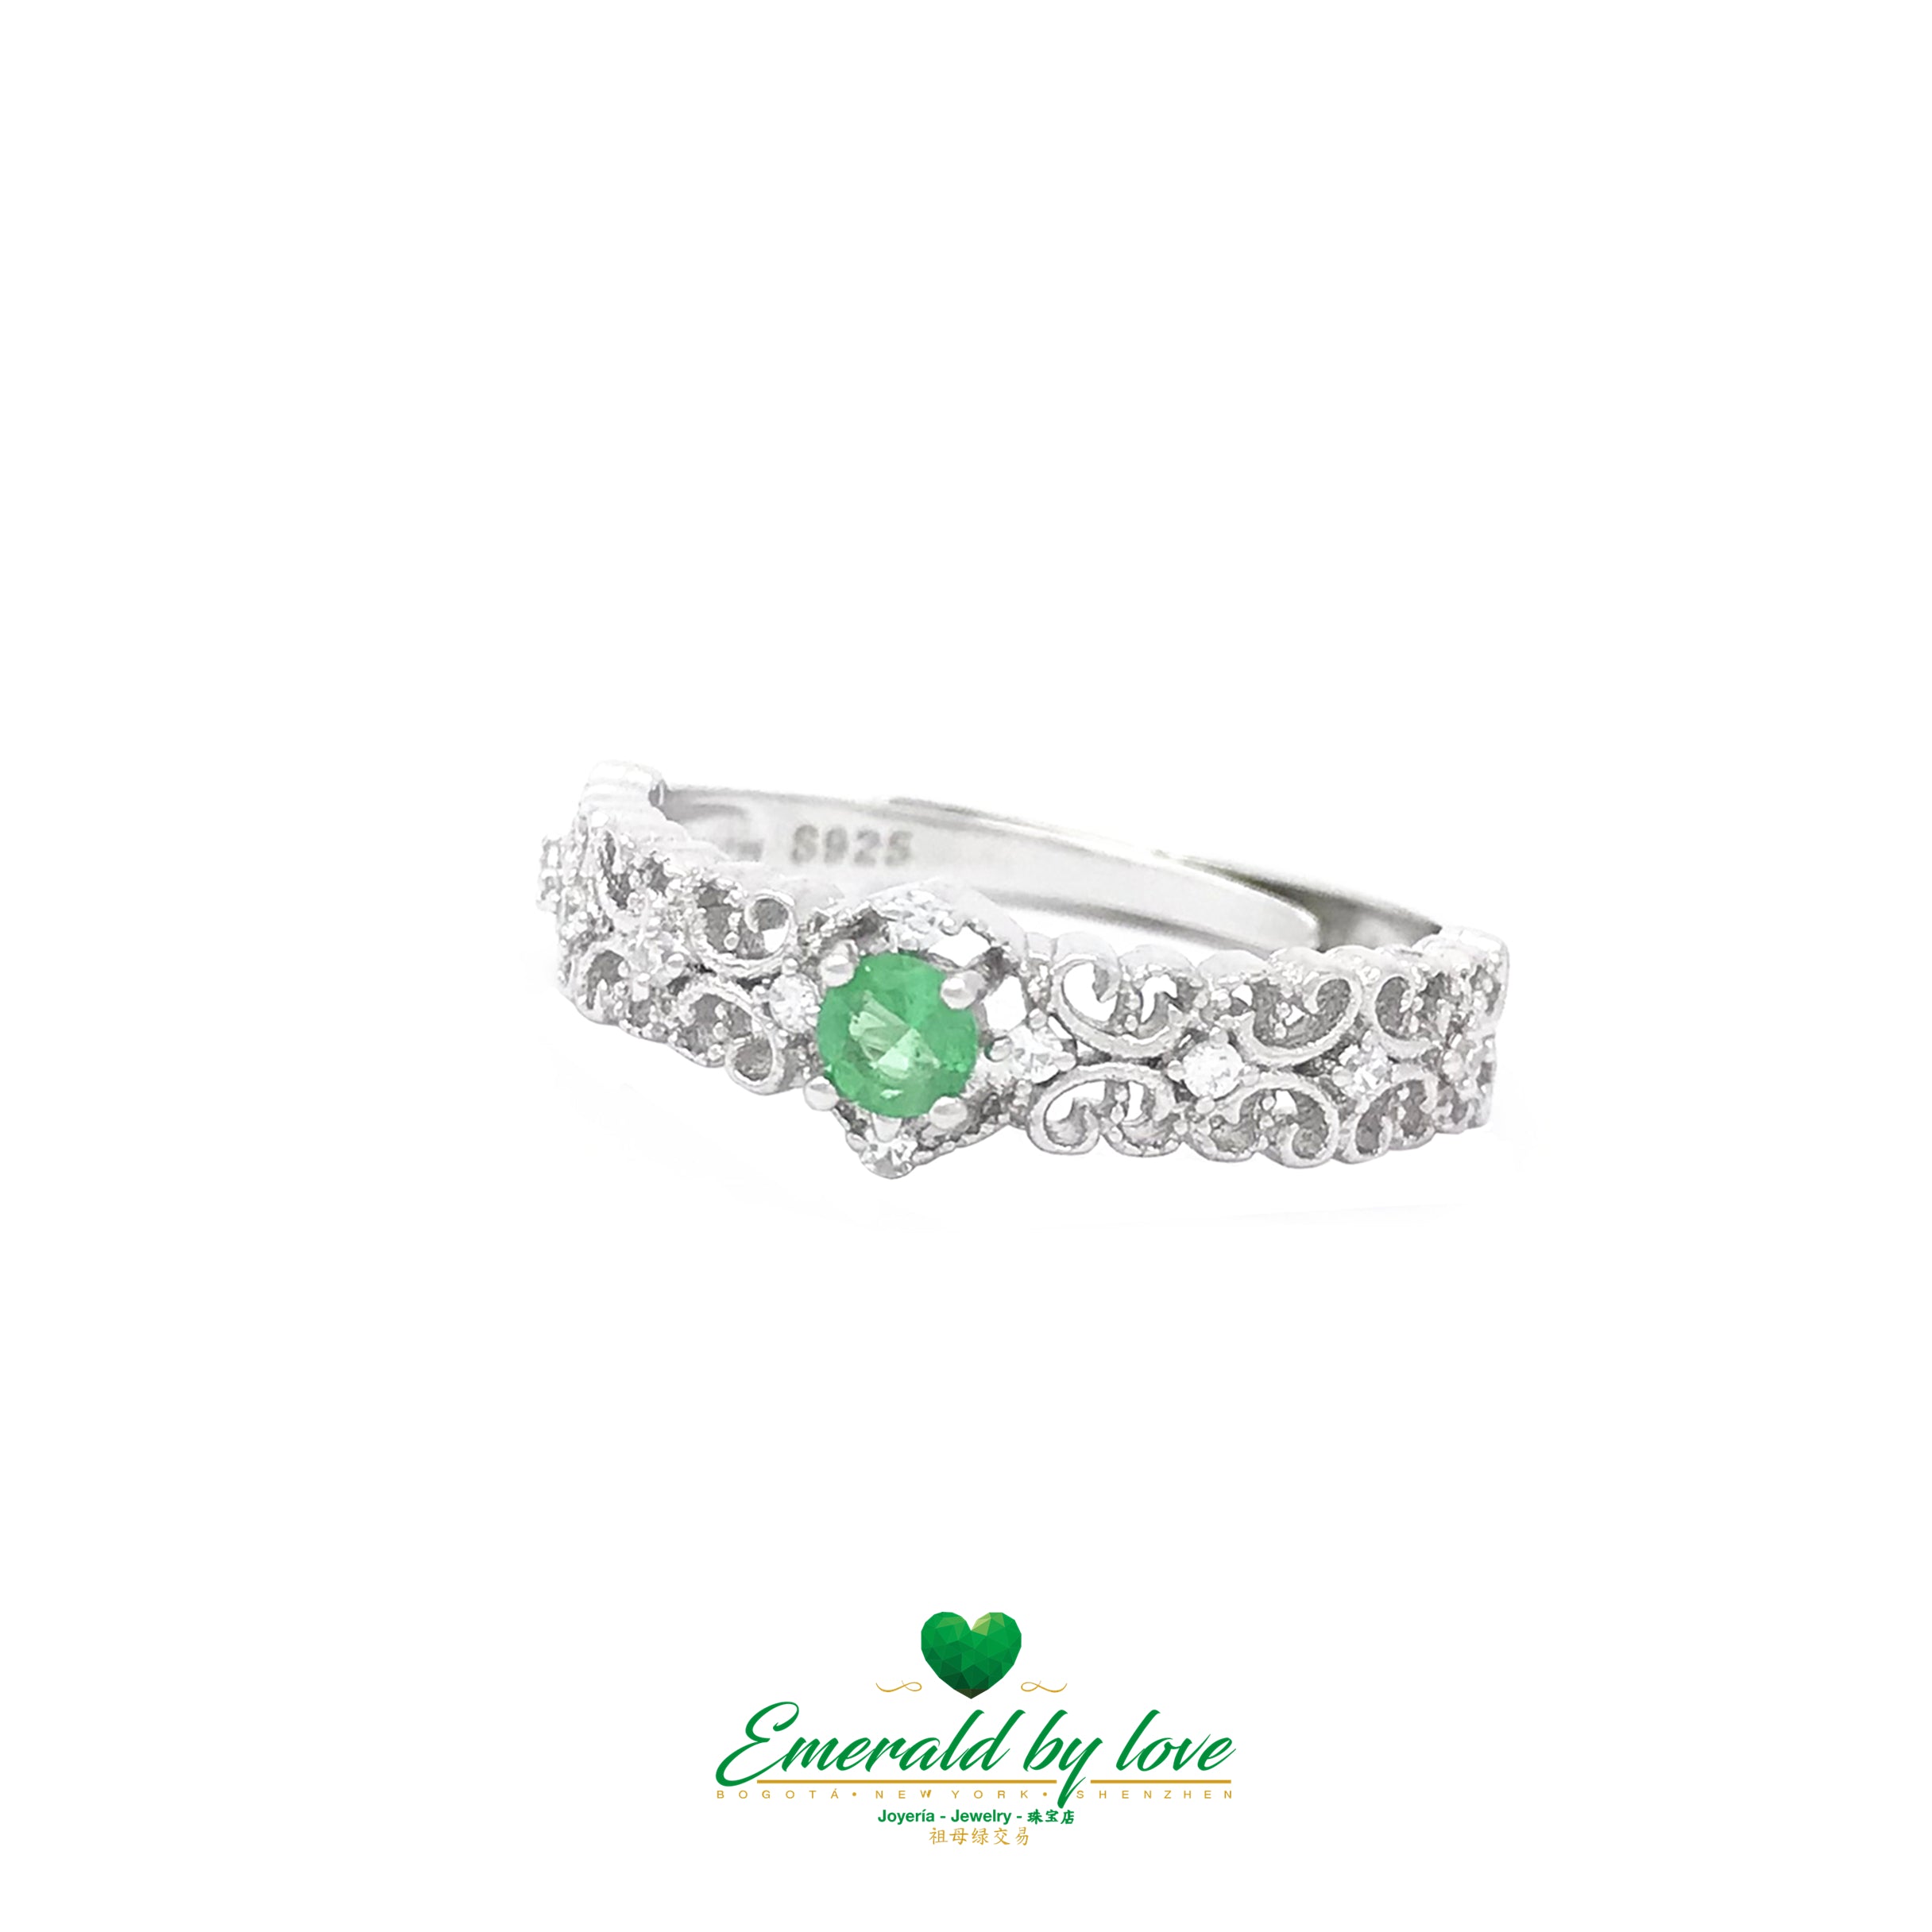 Silver Ring with Intricate Arabesque Band and Petite Round Crystal Emerald